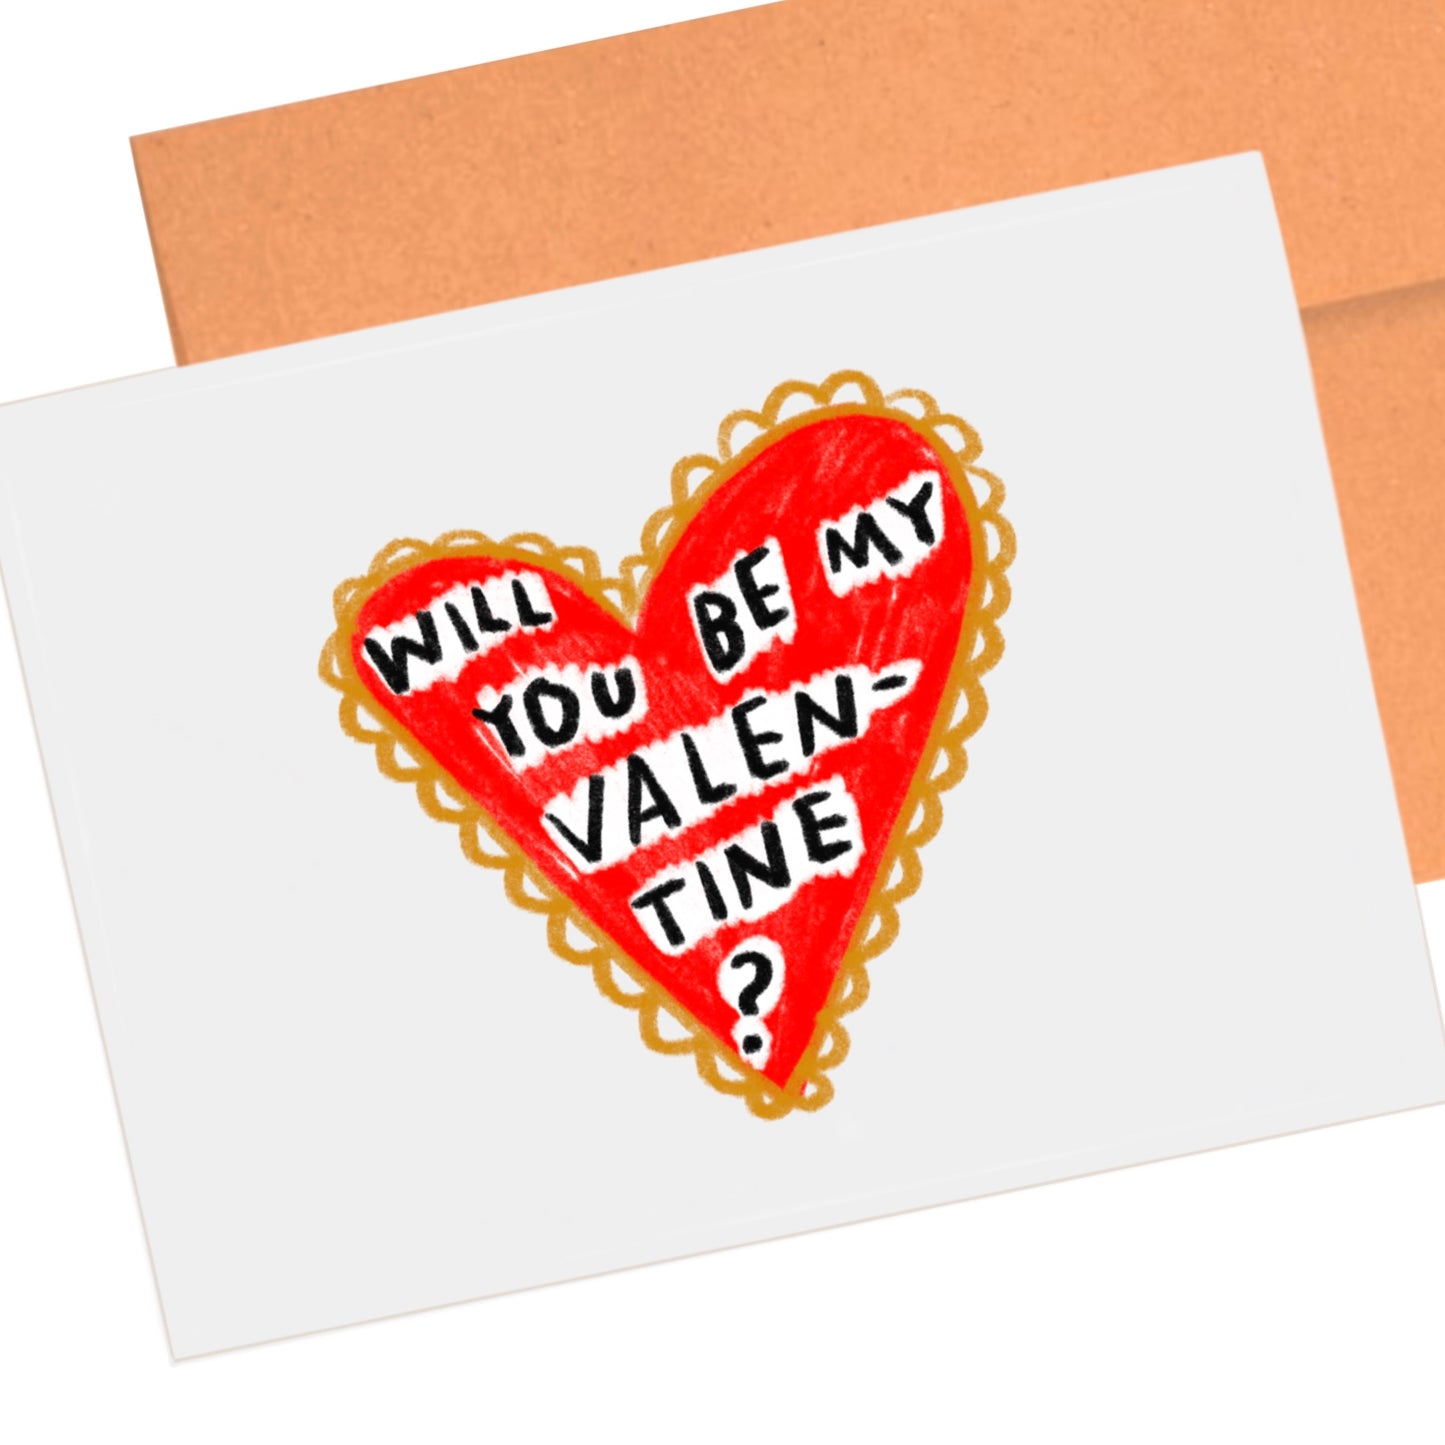 WILL YOU BE MY VALENTINE? Greeting Card